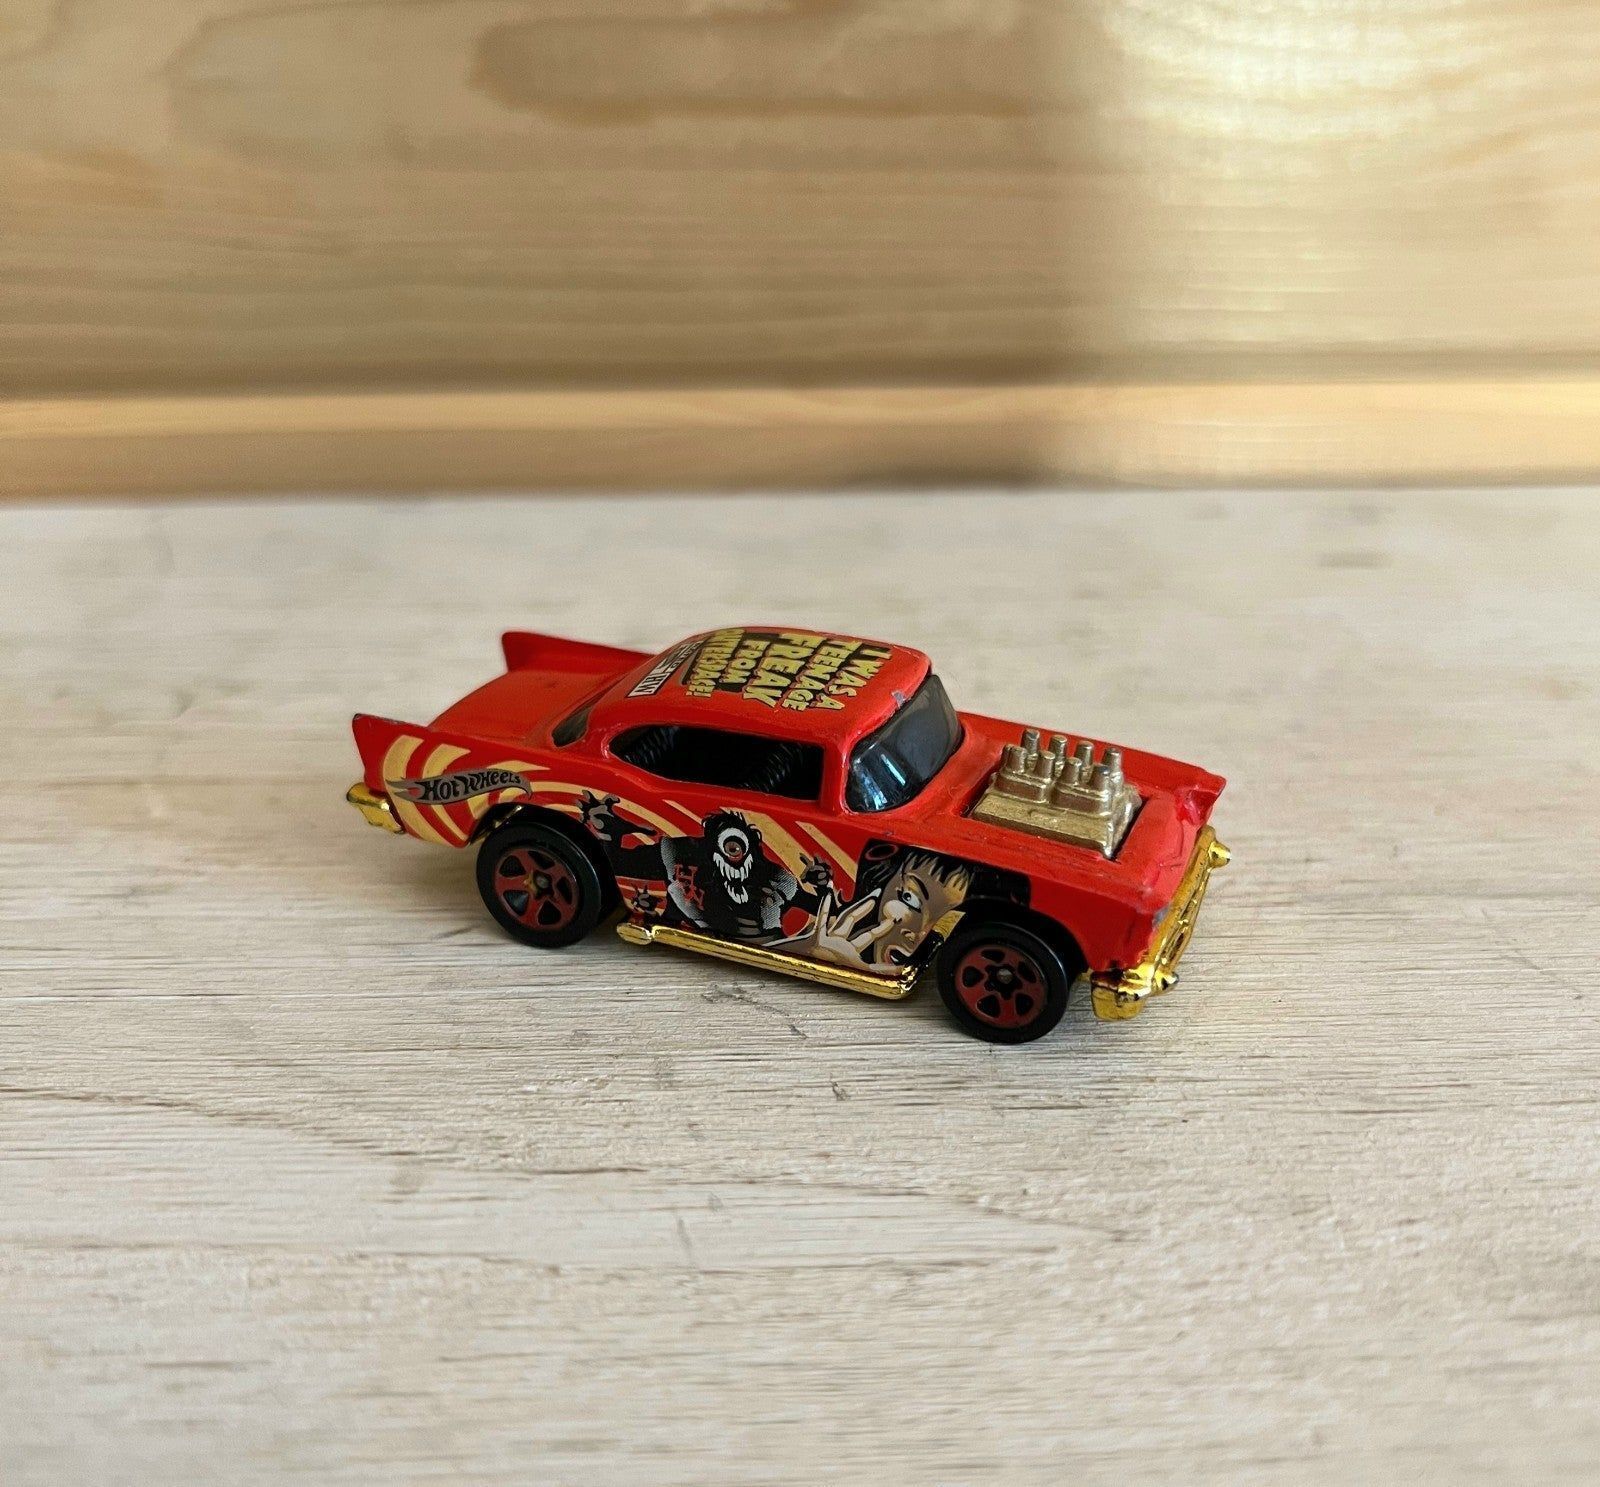 Primary image for Hot Wheels 1976 I Was A Teenage Freak From Outerspace Vintage Race Car 57 Chevy